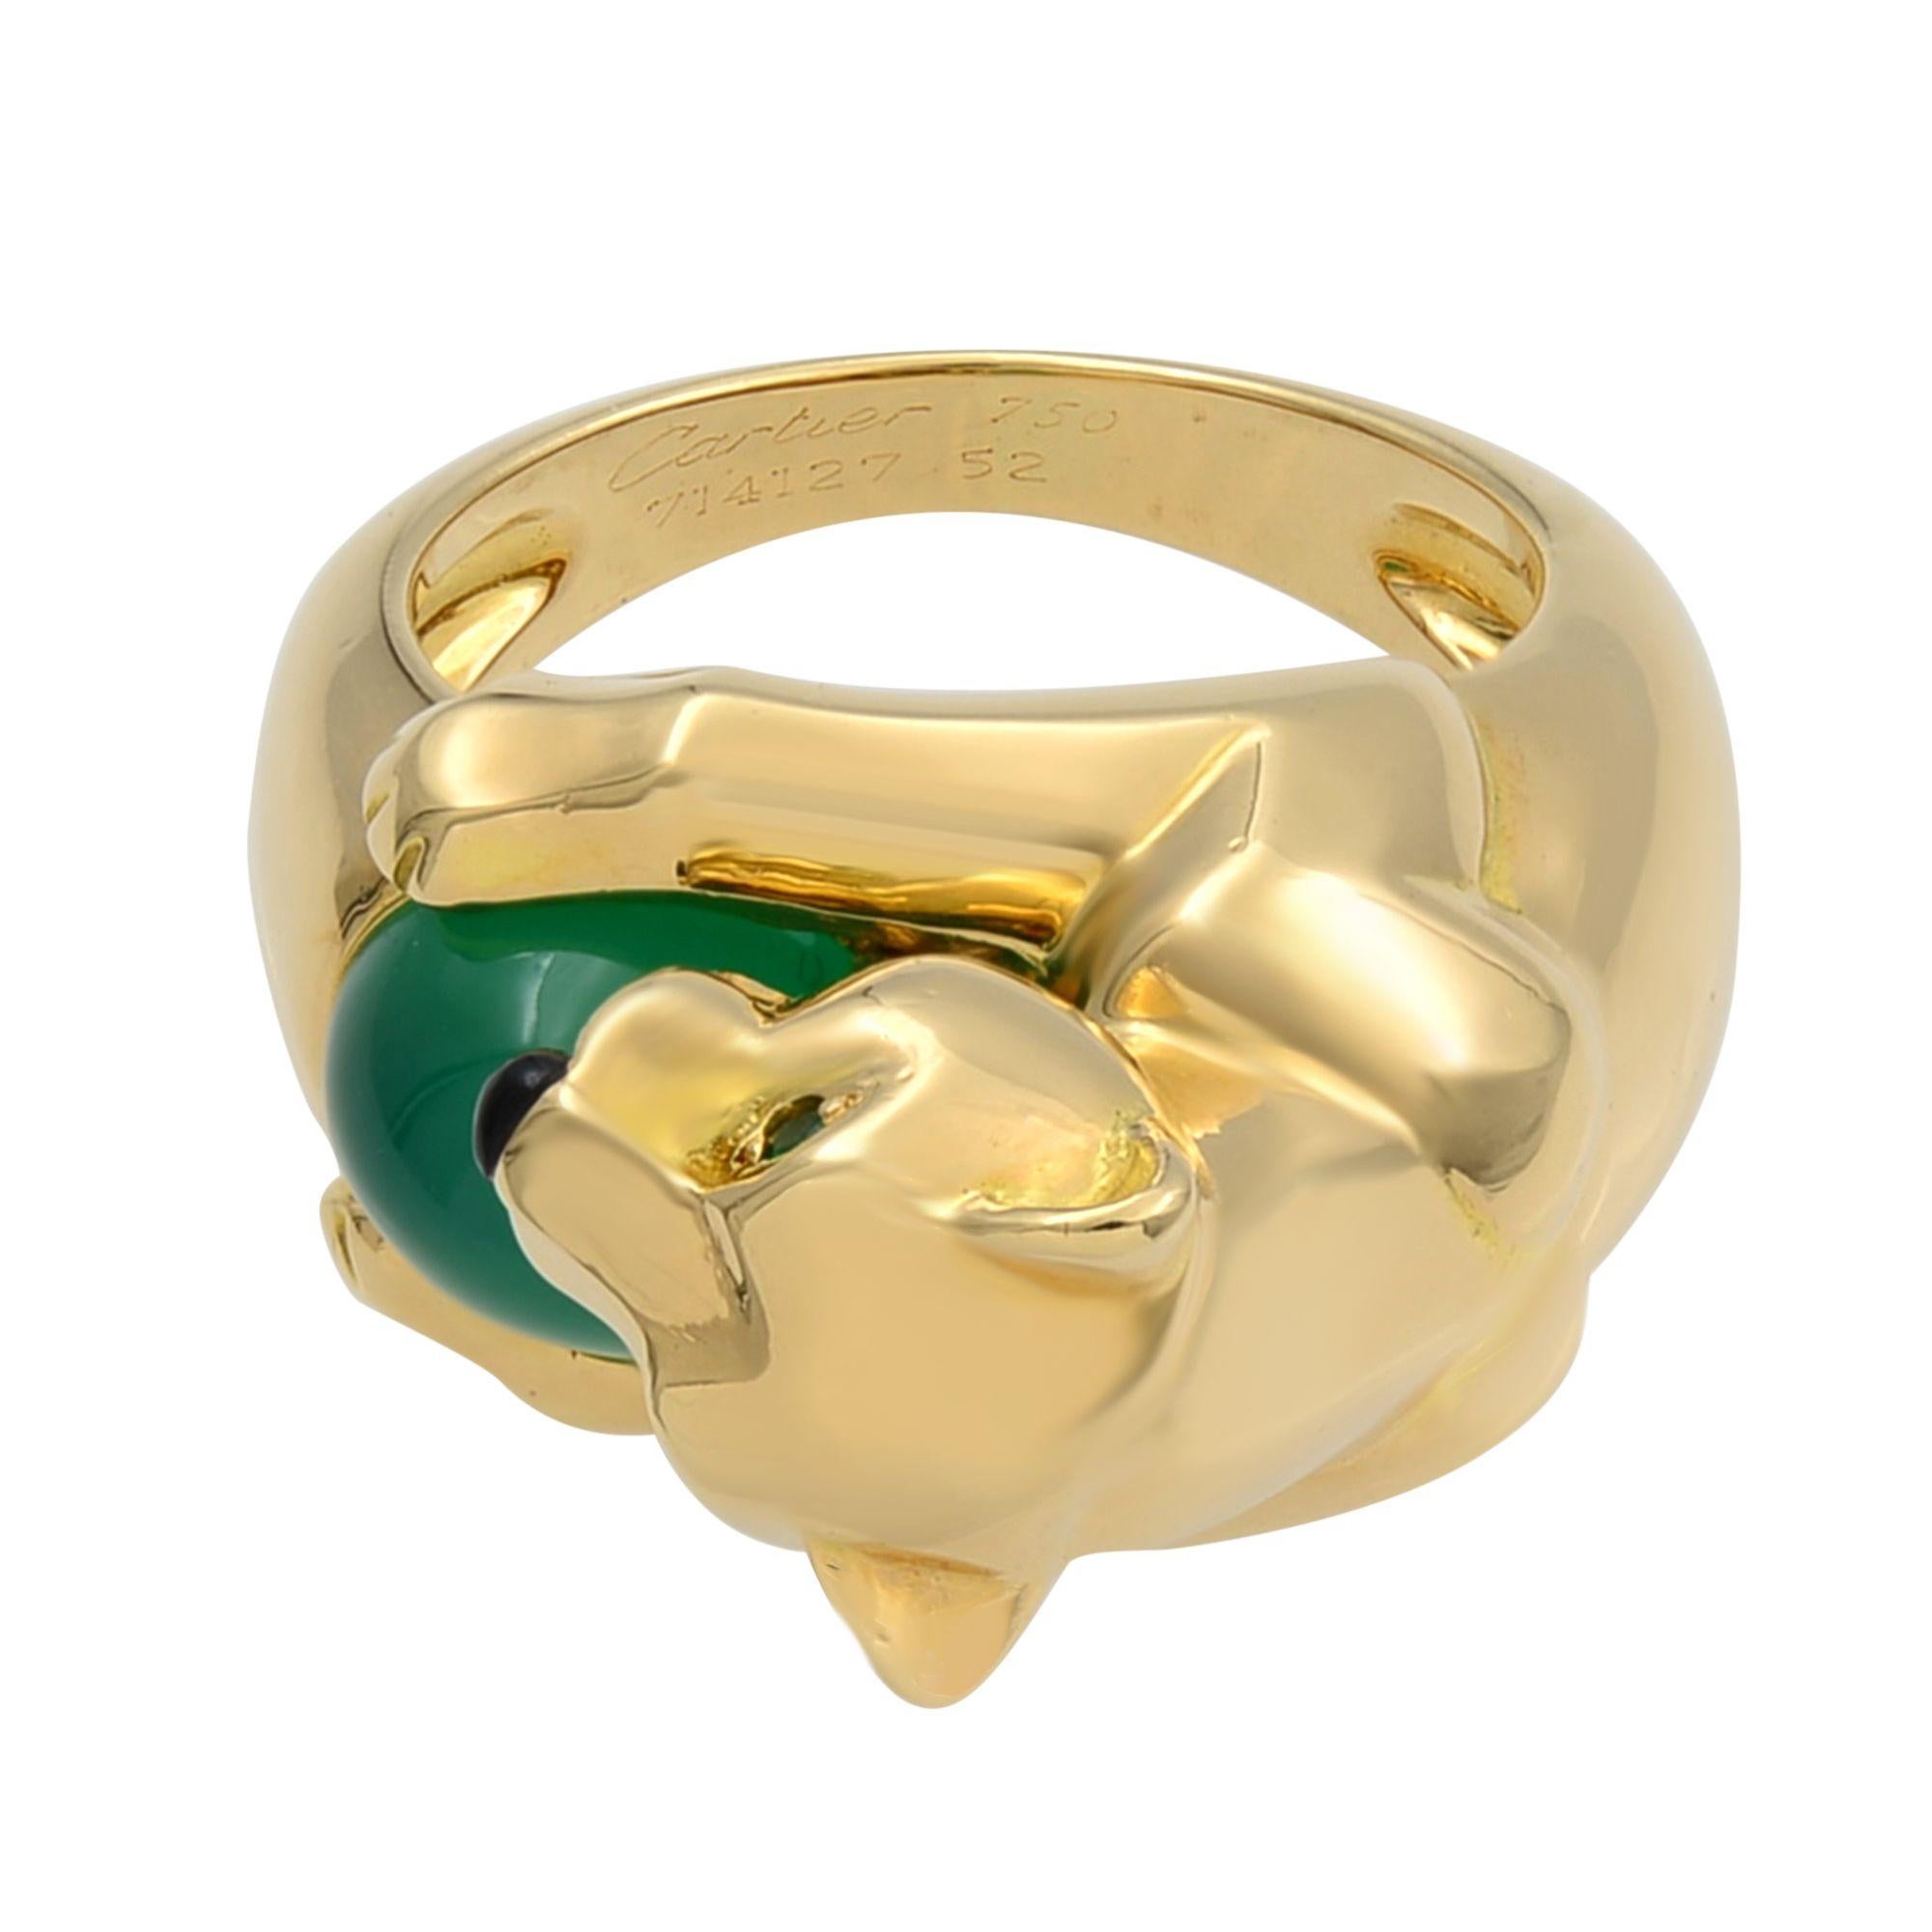 Modern Cartier 18 Karat Yellow Gold Chalcedony Emerald and Onyx Panther Ring